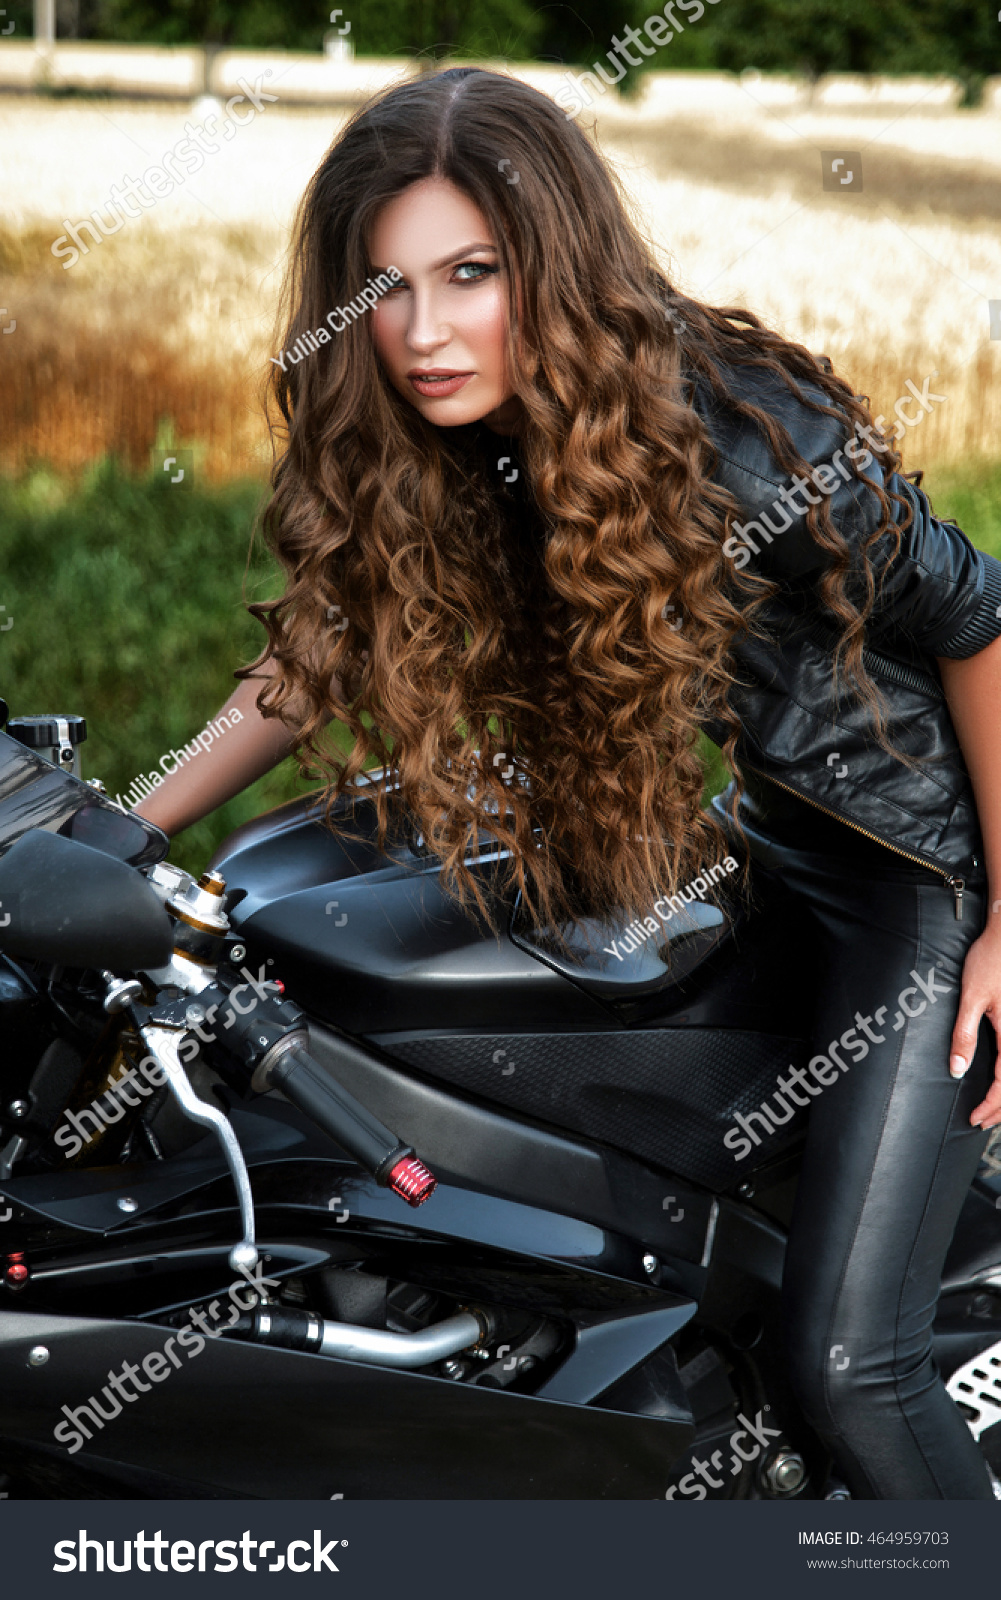 aljhon reyes add pictures of biker woman photo